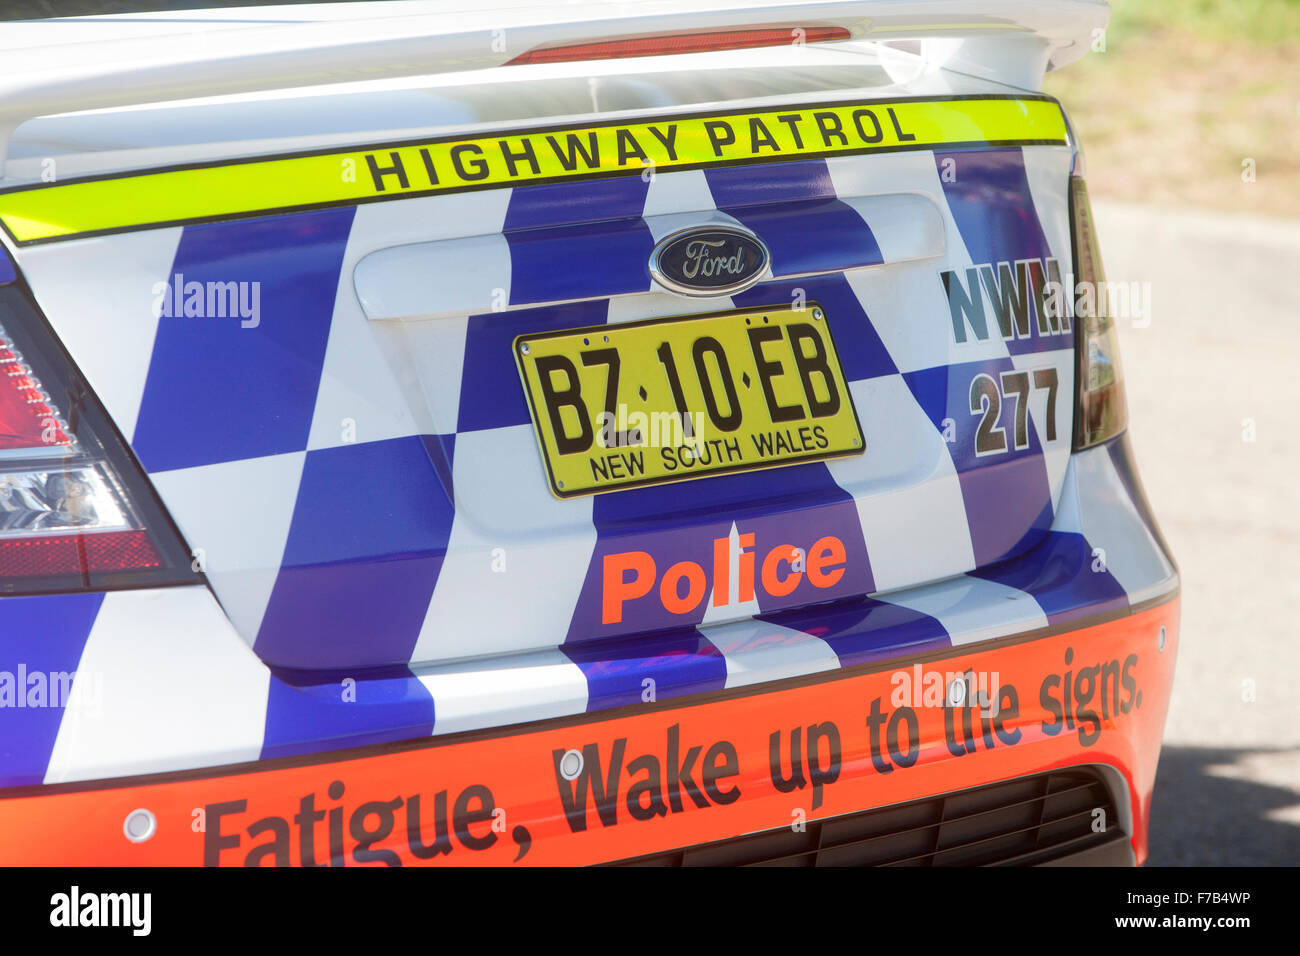 Rear view of NSW new south wales Sydney police force highway patrol car in Australia Stock Photo